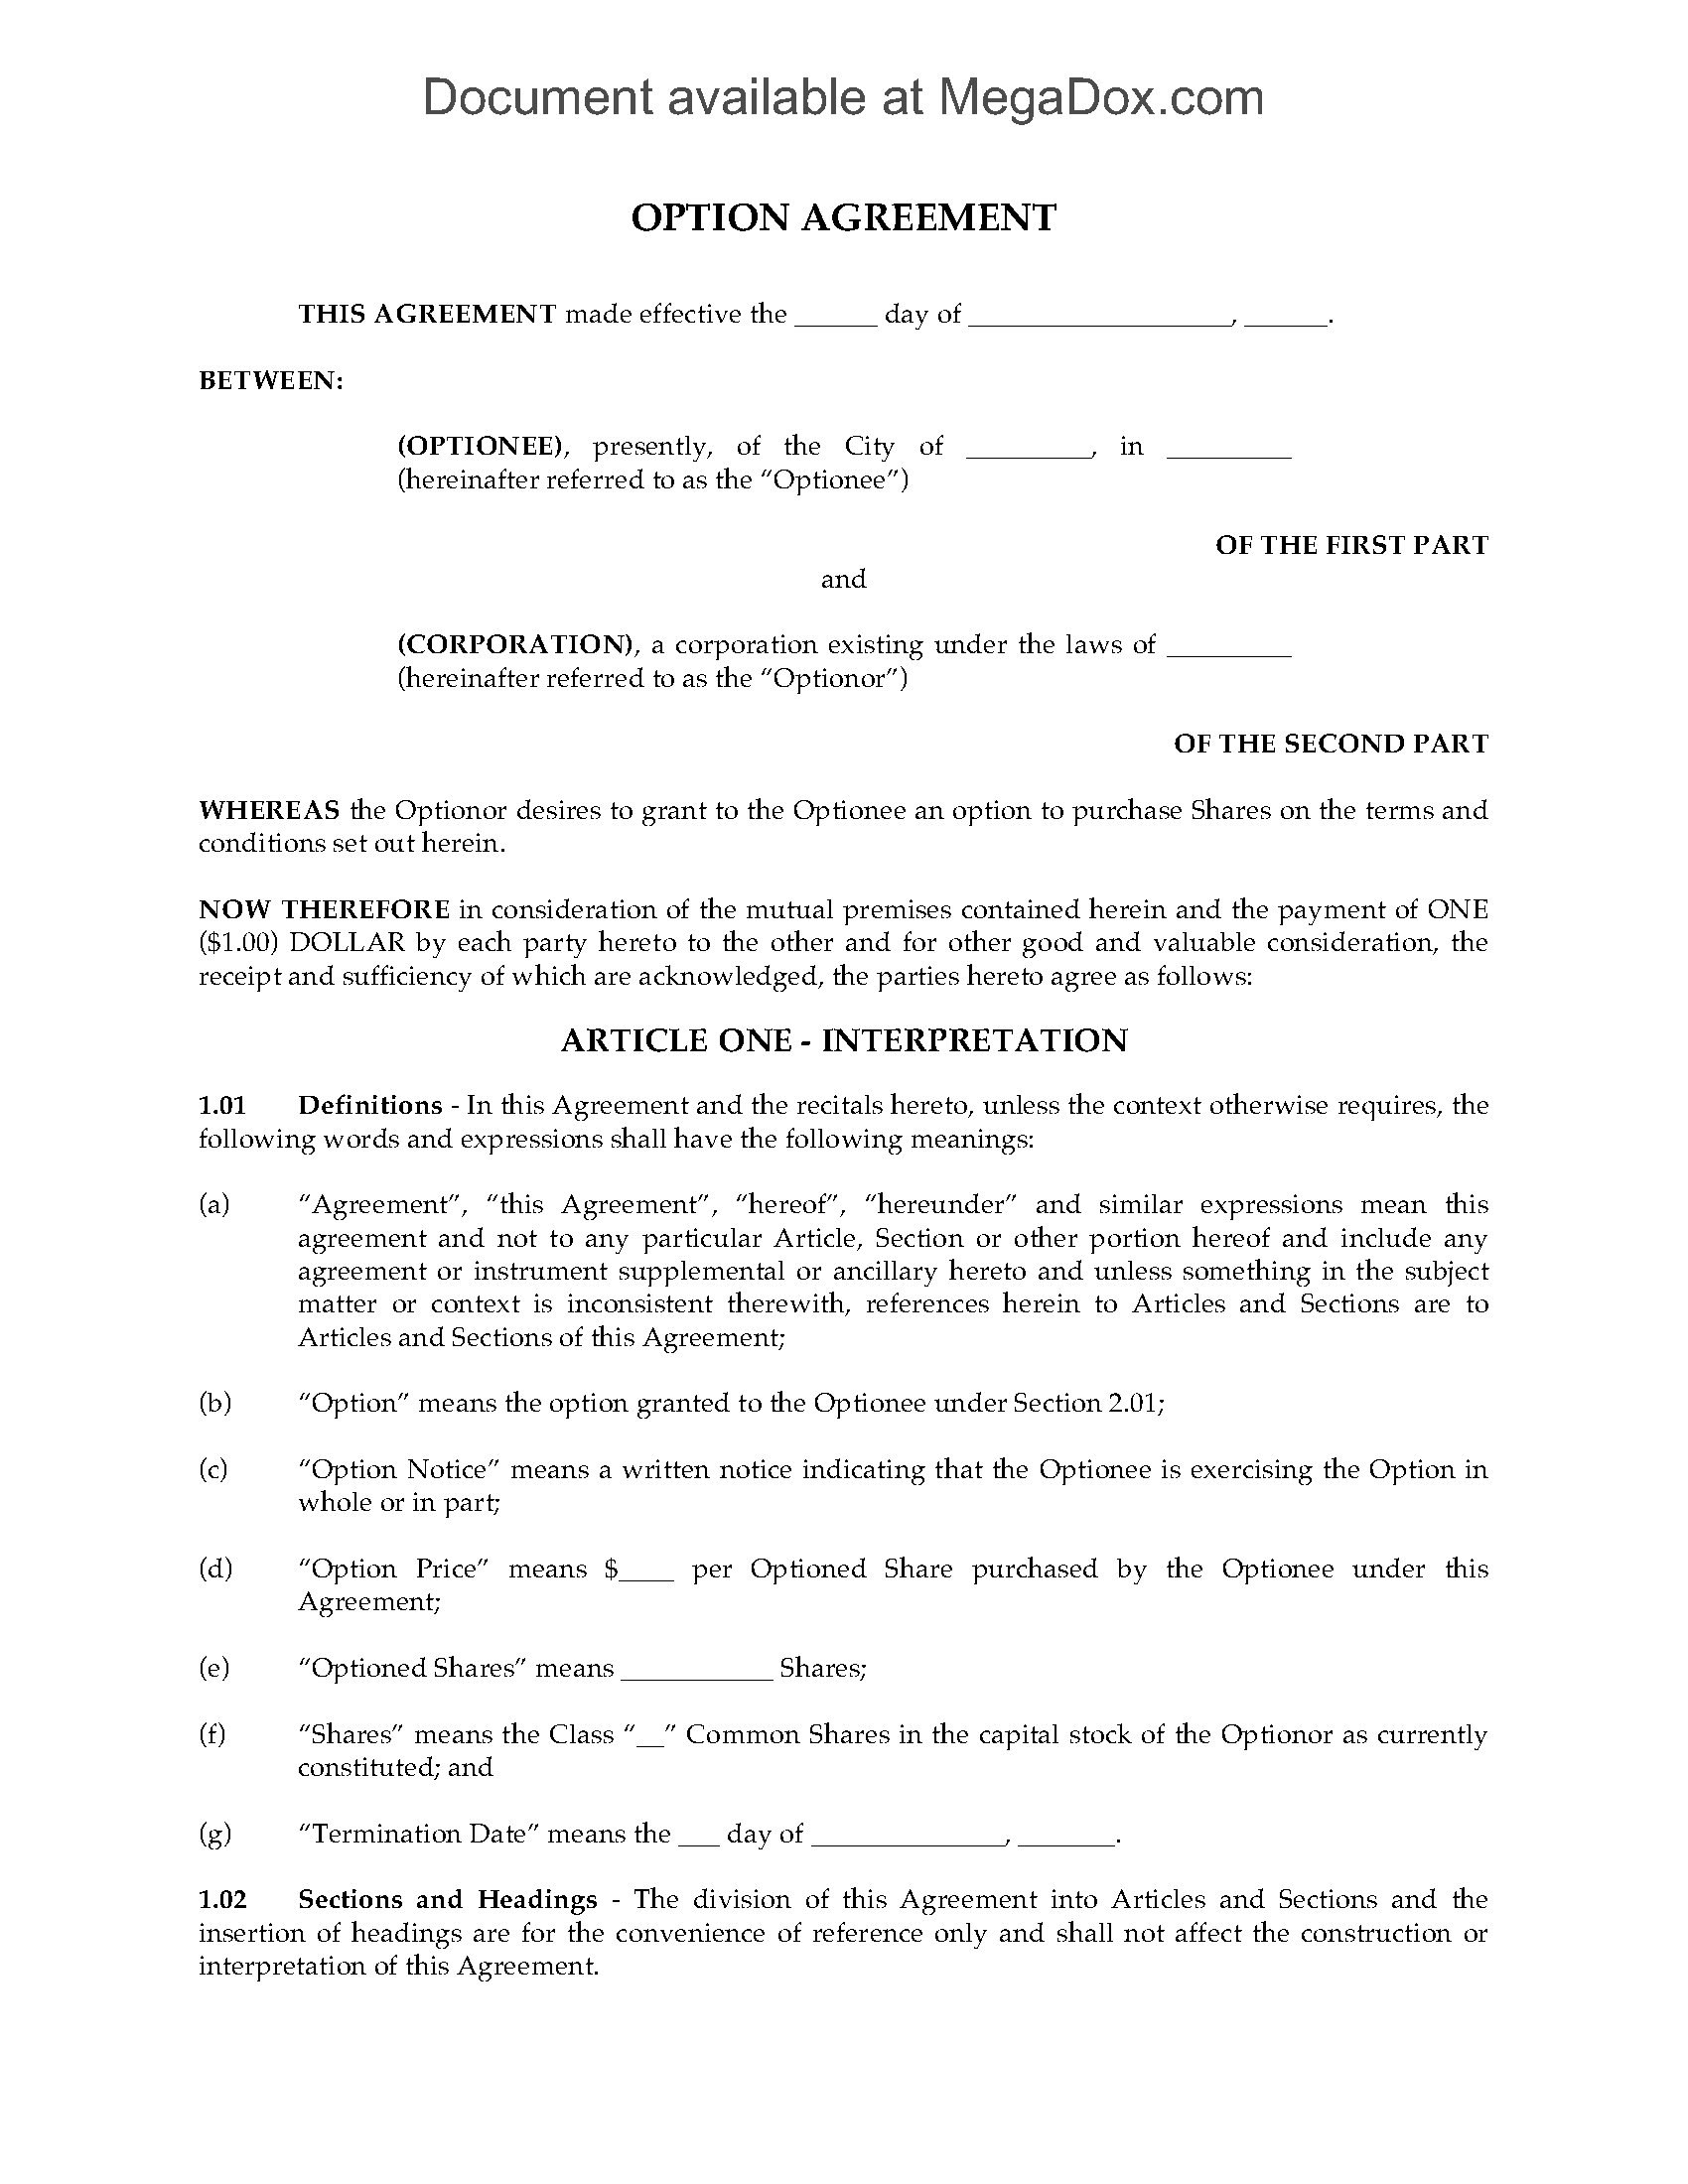 Canada Stock Option Agreement Nonplan  Legal Forms And Business with Supplemental Agreement Template